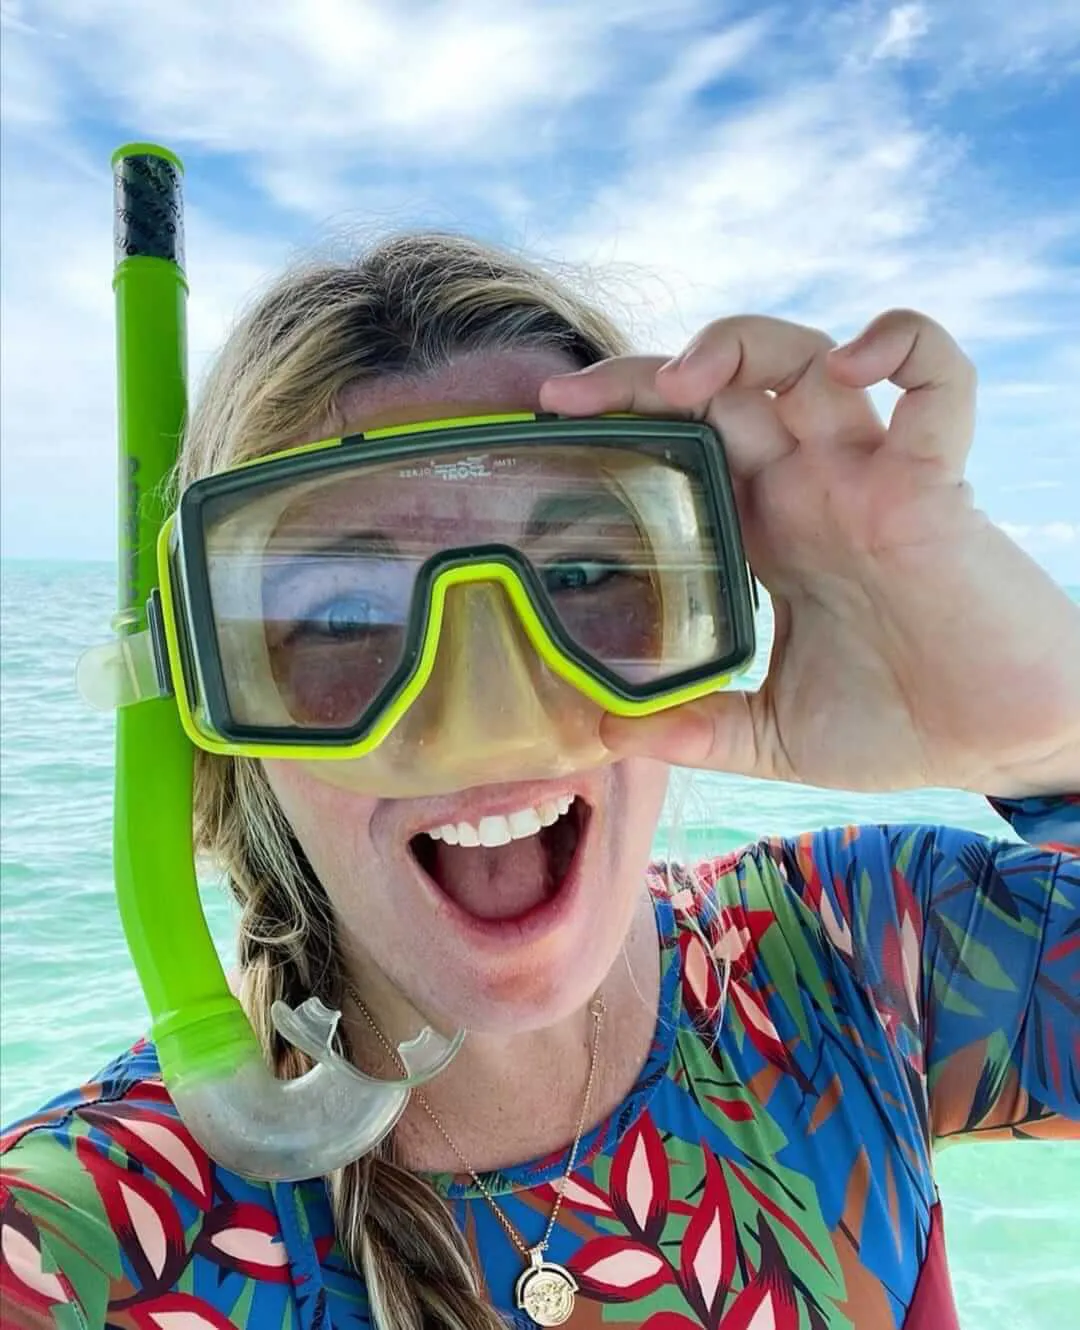 Blode snorkeler girl smiling at camera while wearing and holding her mask